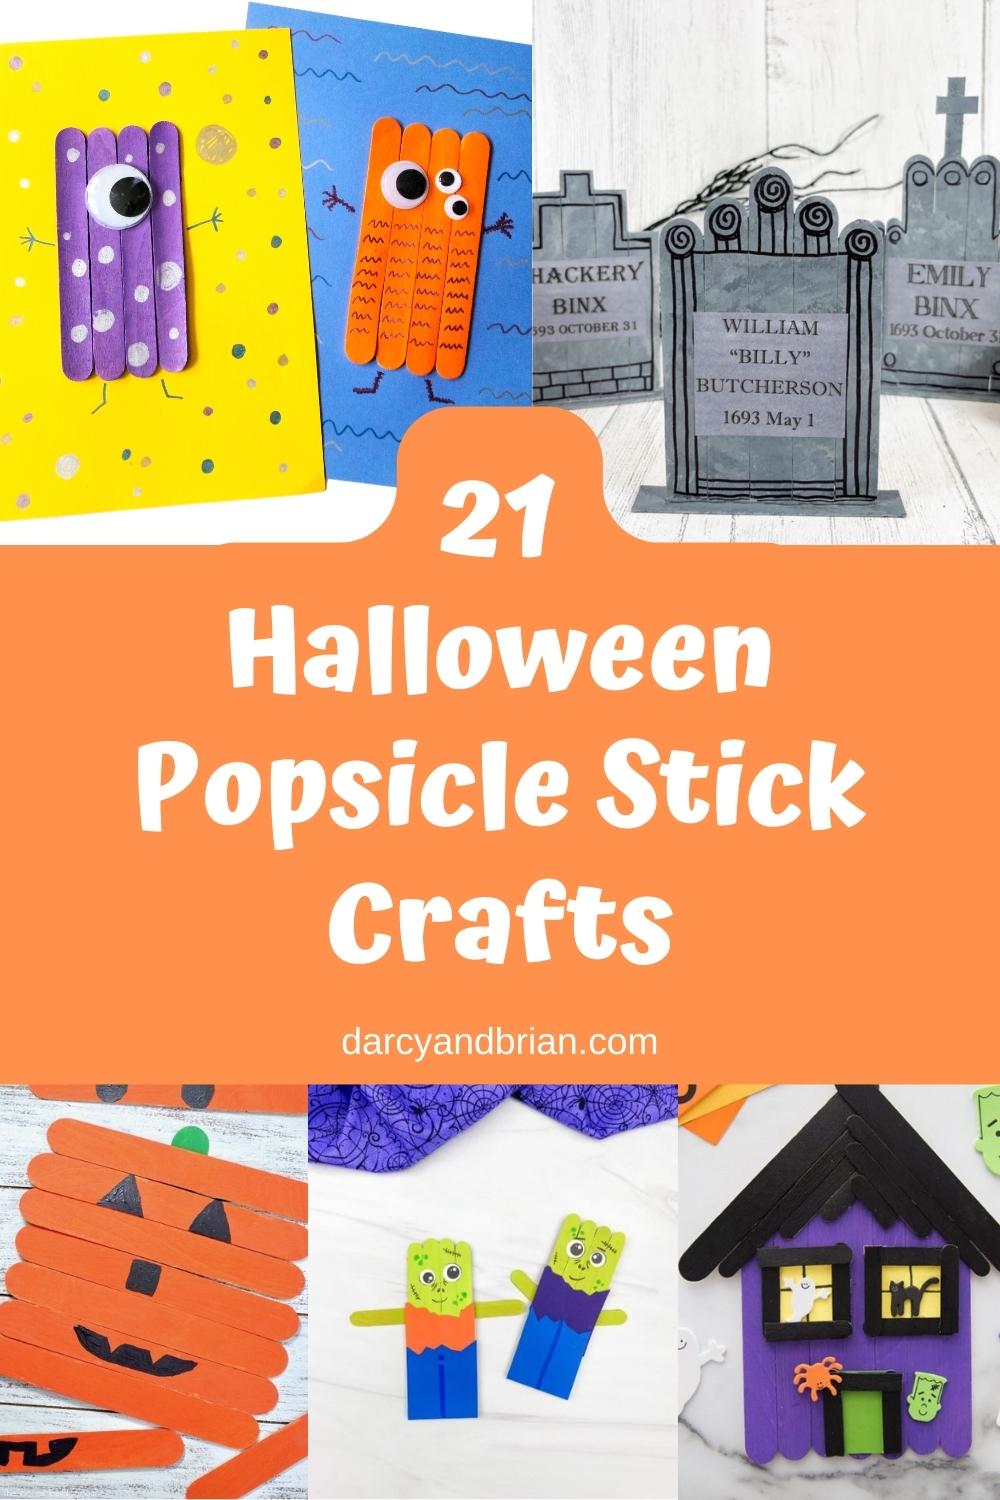 Free Printable Popsicle Template  Popsicle crafts, Popsicle stick crafts  for kids, Popsicles